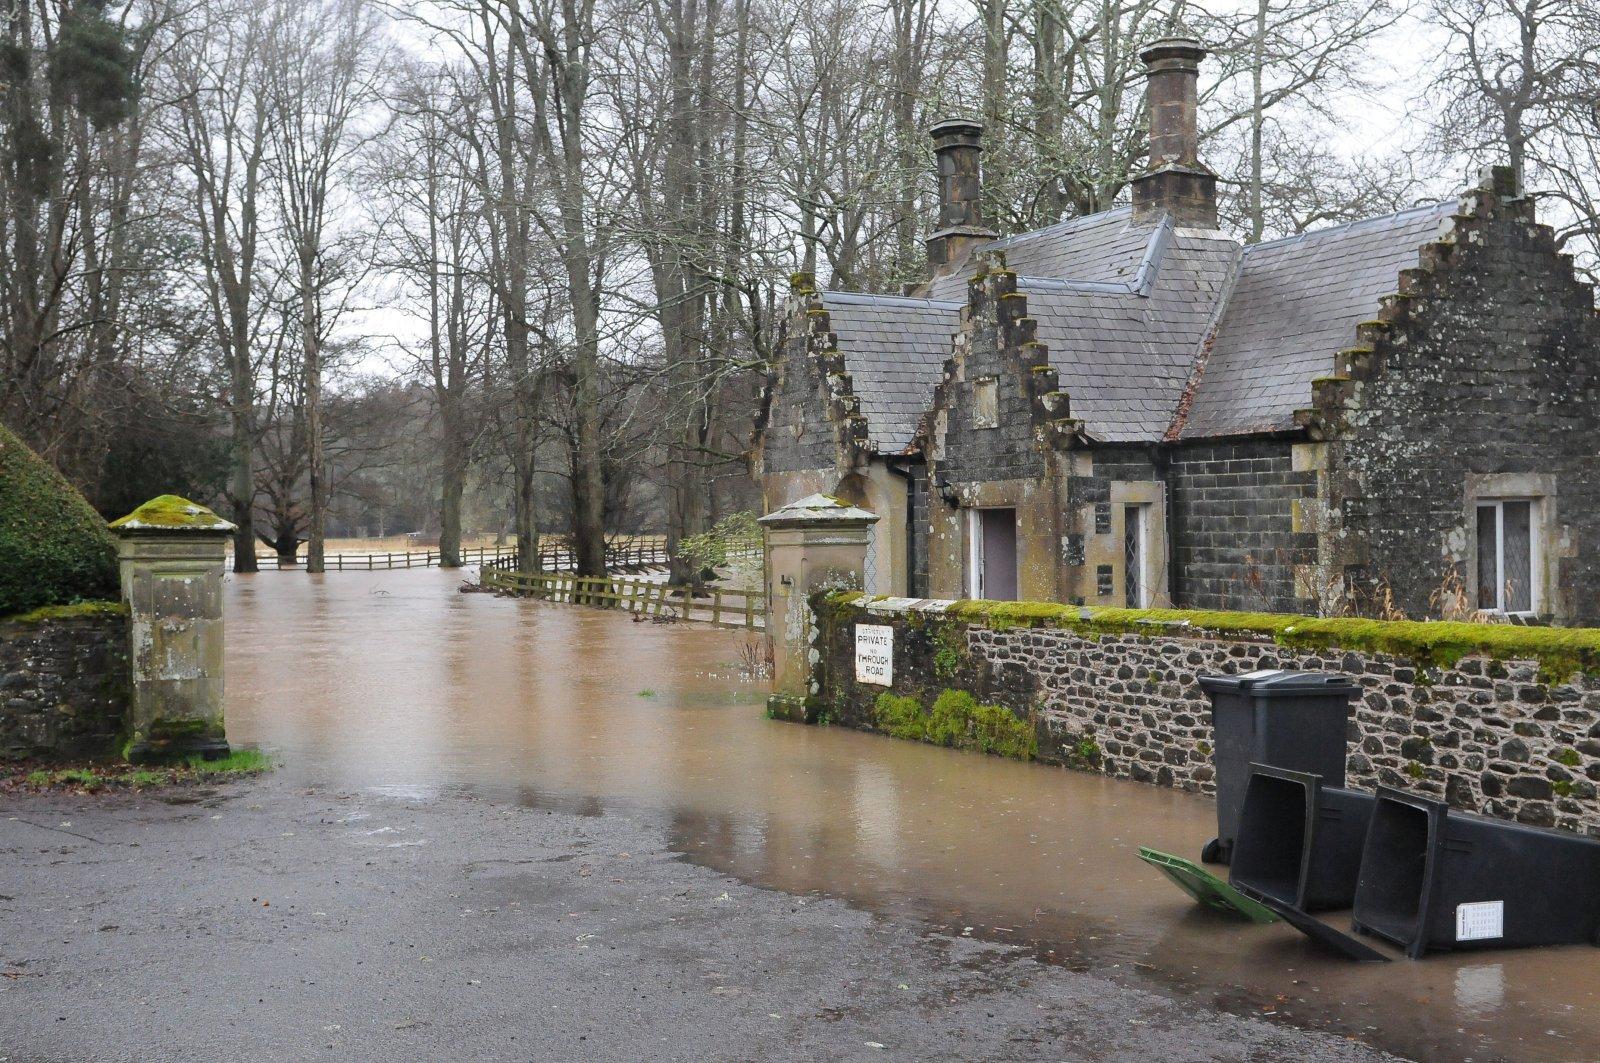 Flooding at the lodge house for the Sunderland Hall estate near Selkirk.